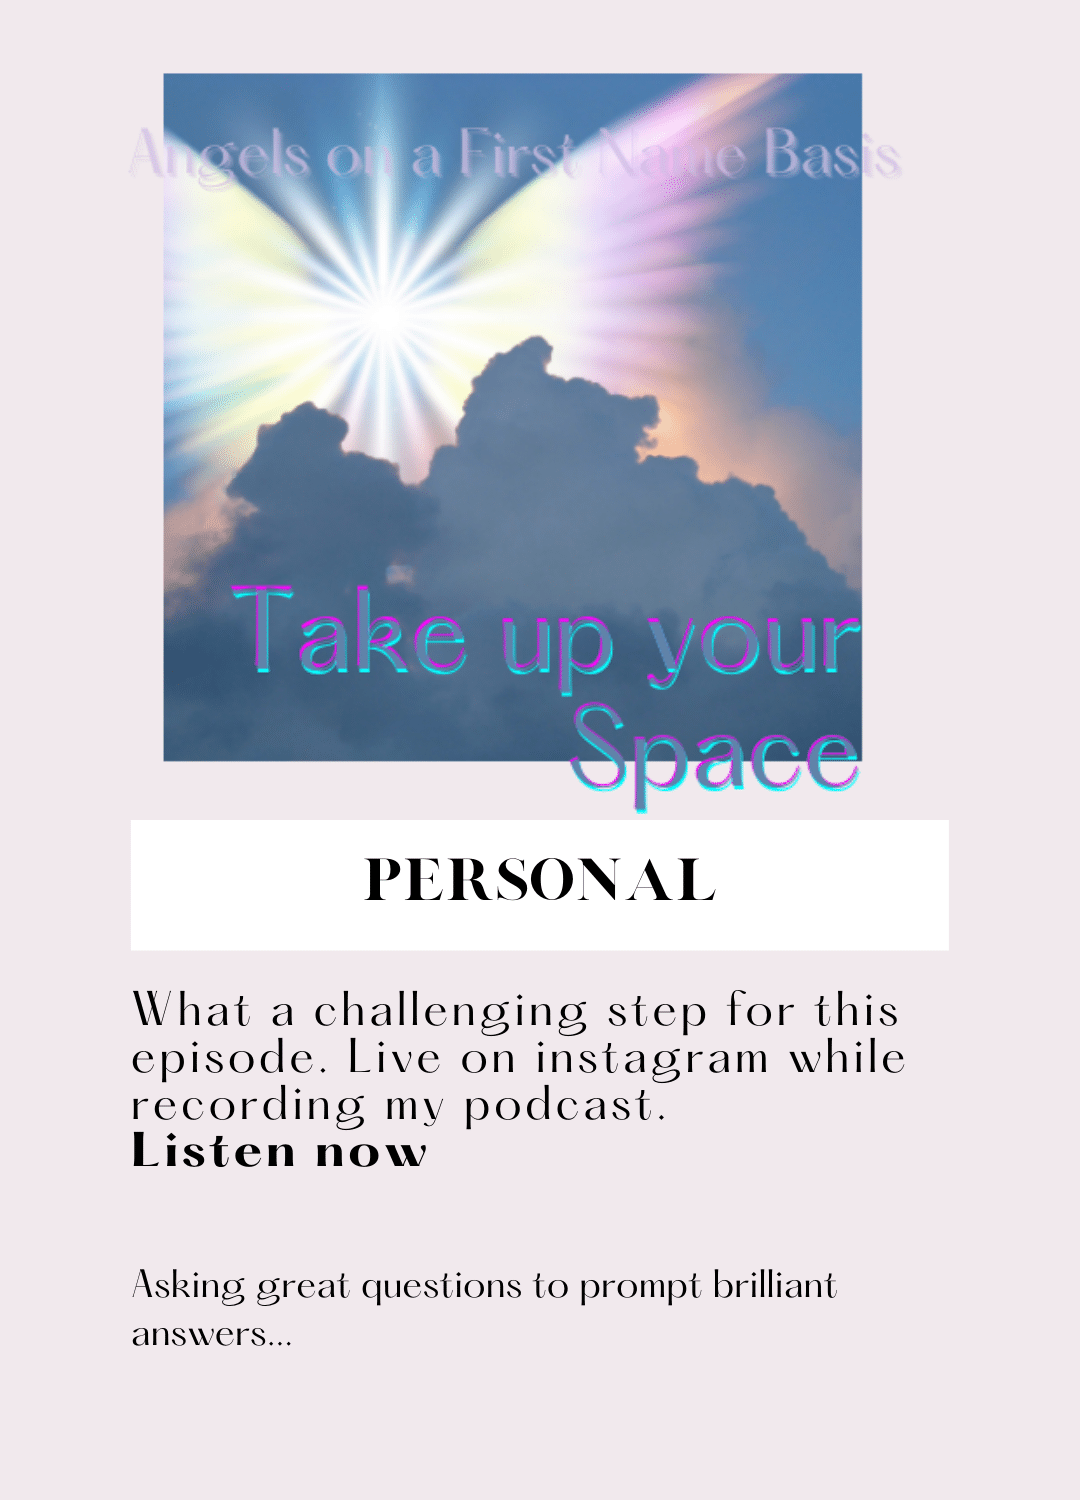 Take up your Space, Angels on a First Name Basis #2, Intentional Now Podcast